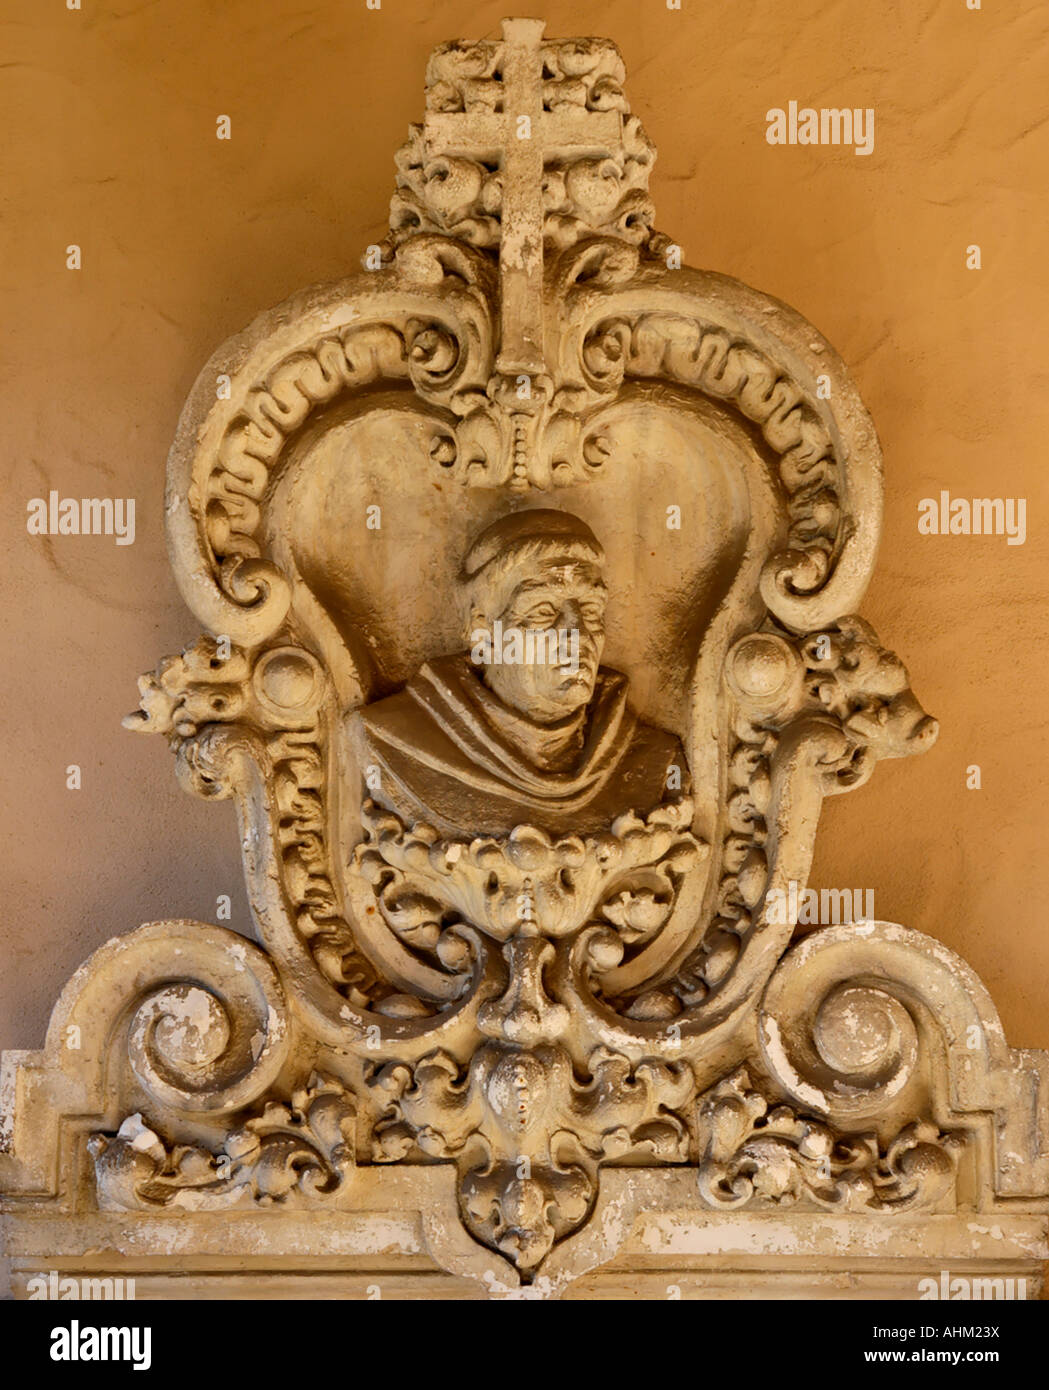 An architectural detail from one of the buildings is on display in an alcove of the Casa del Prado building in Balboa Park, San Diego, California, USA Stock Photo